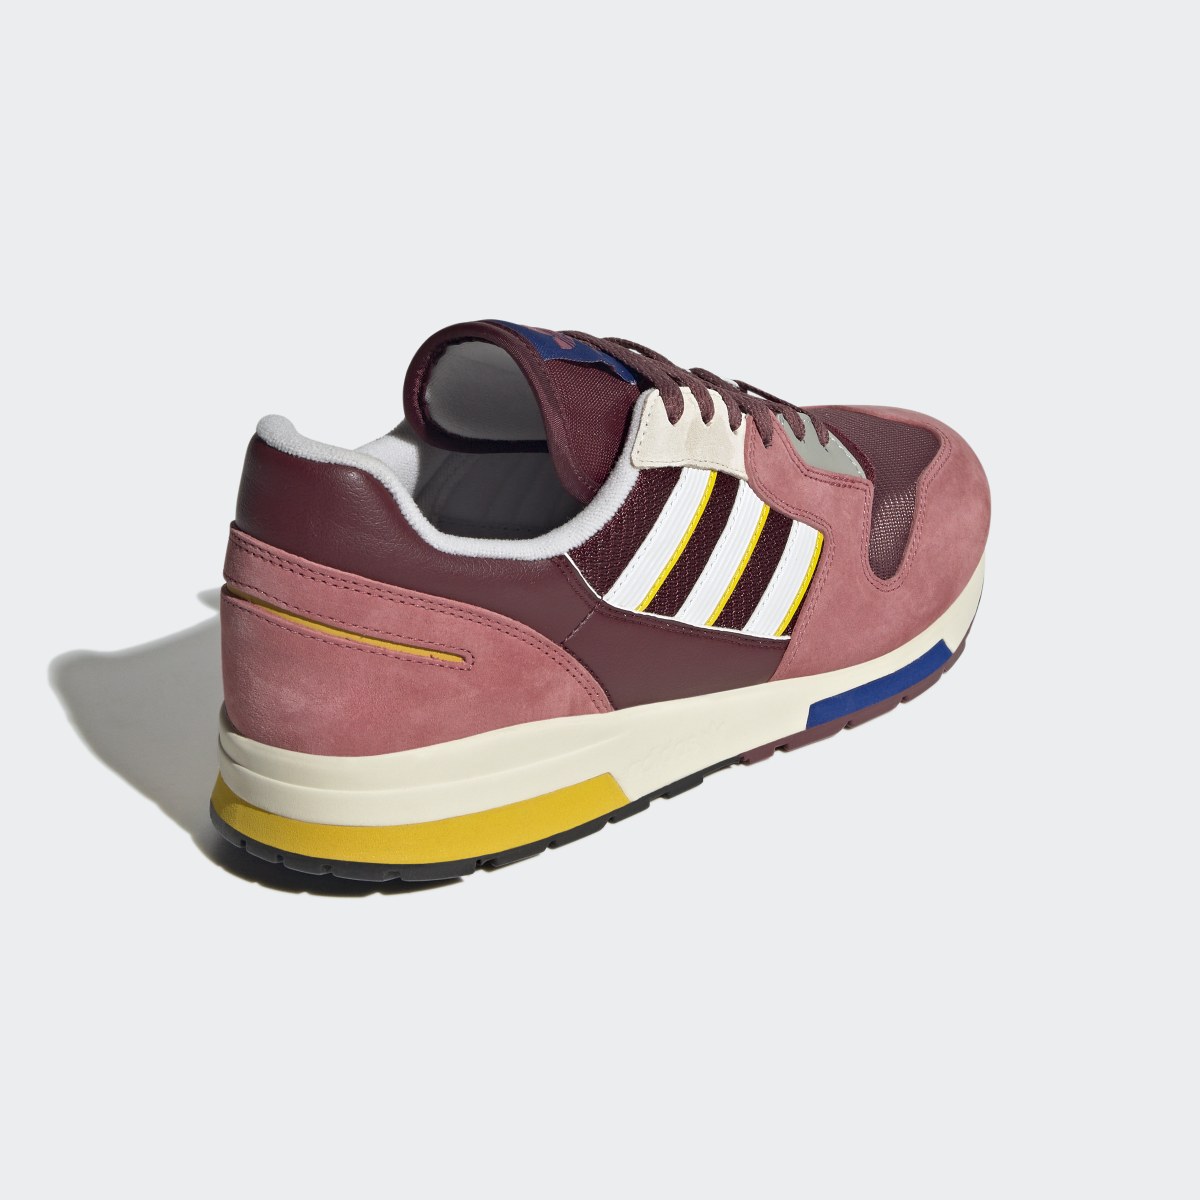 Adidas ZX 420 Shoes. 6